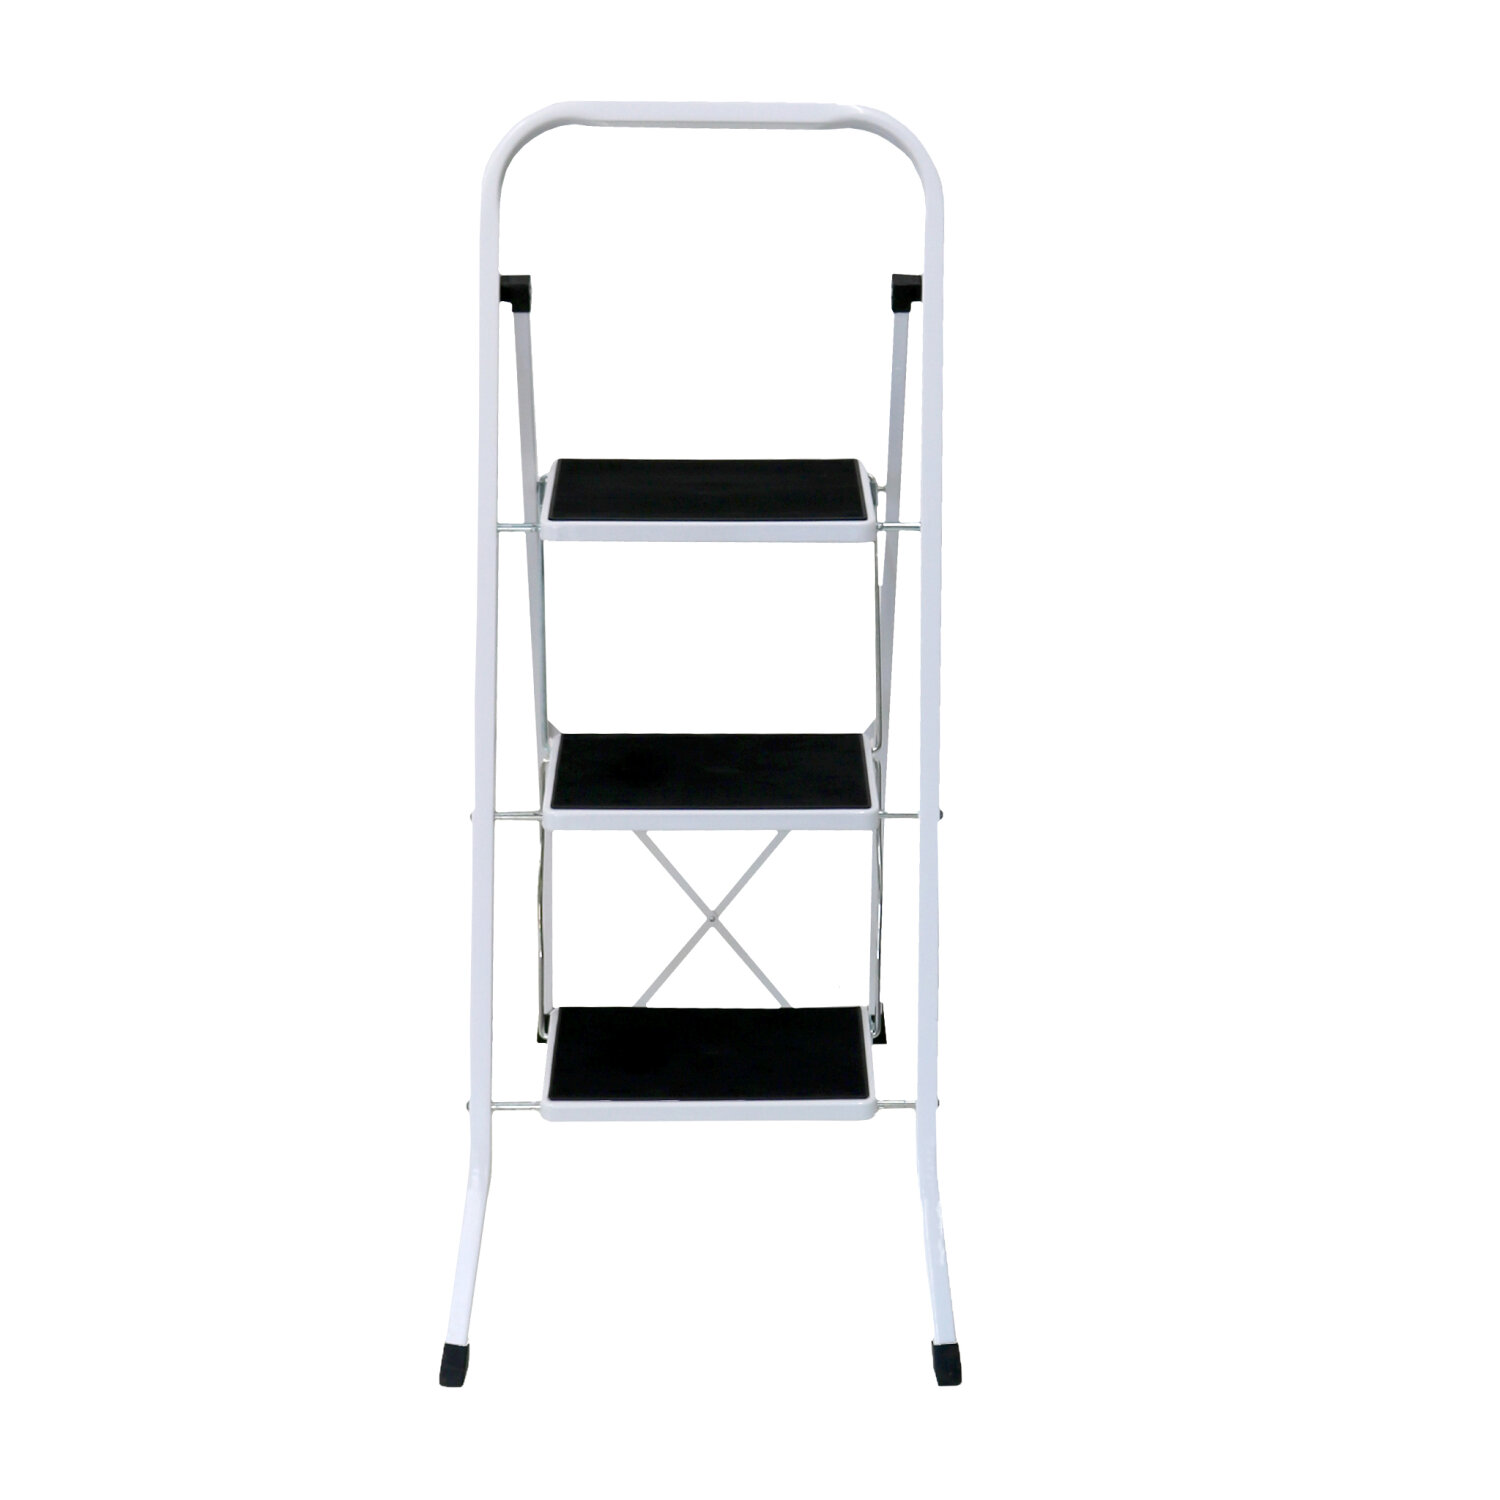 Details about   3 Steps Ladder Folding Non Slip Safety Tread Heavy Duty Industrial Home Use New 